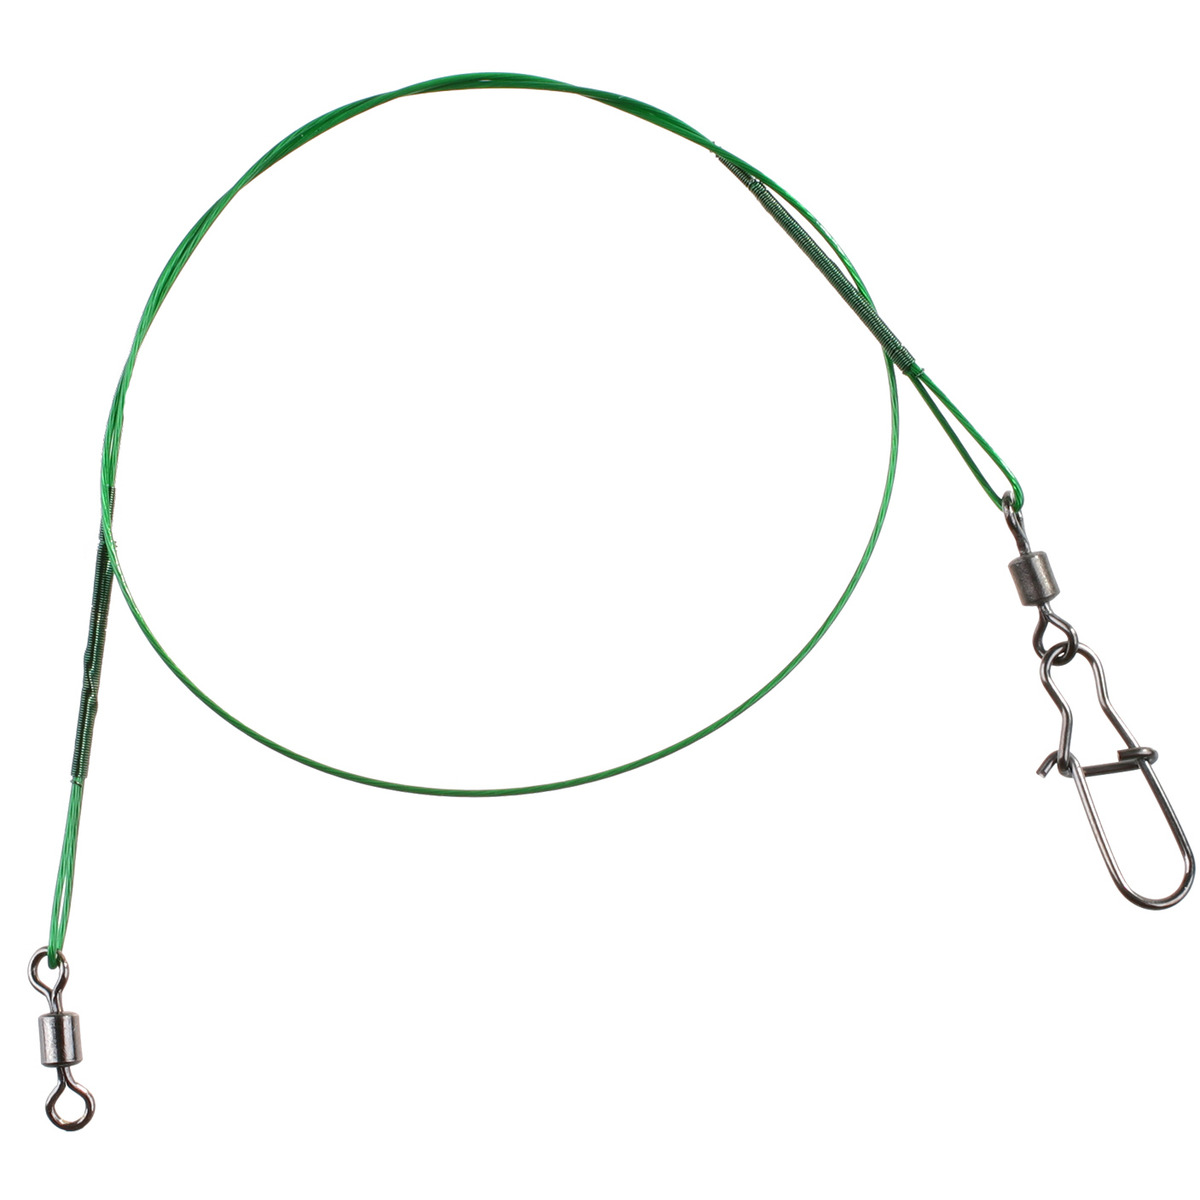 Mikado Steel Leaderwith Swivel And Double Treble Hook - 15 cm / 15kg  GREEN